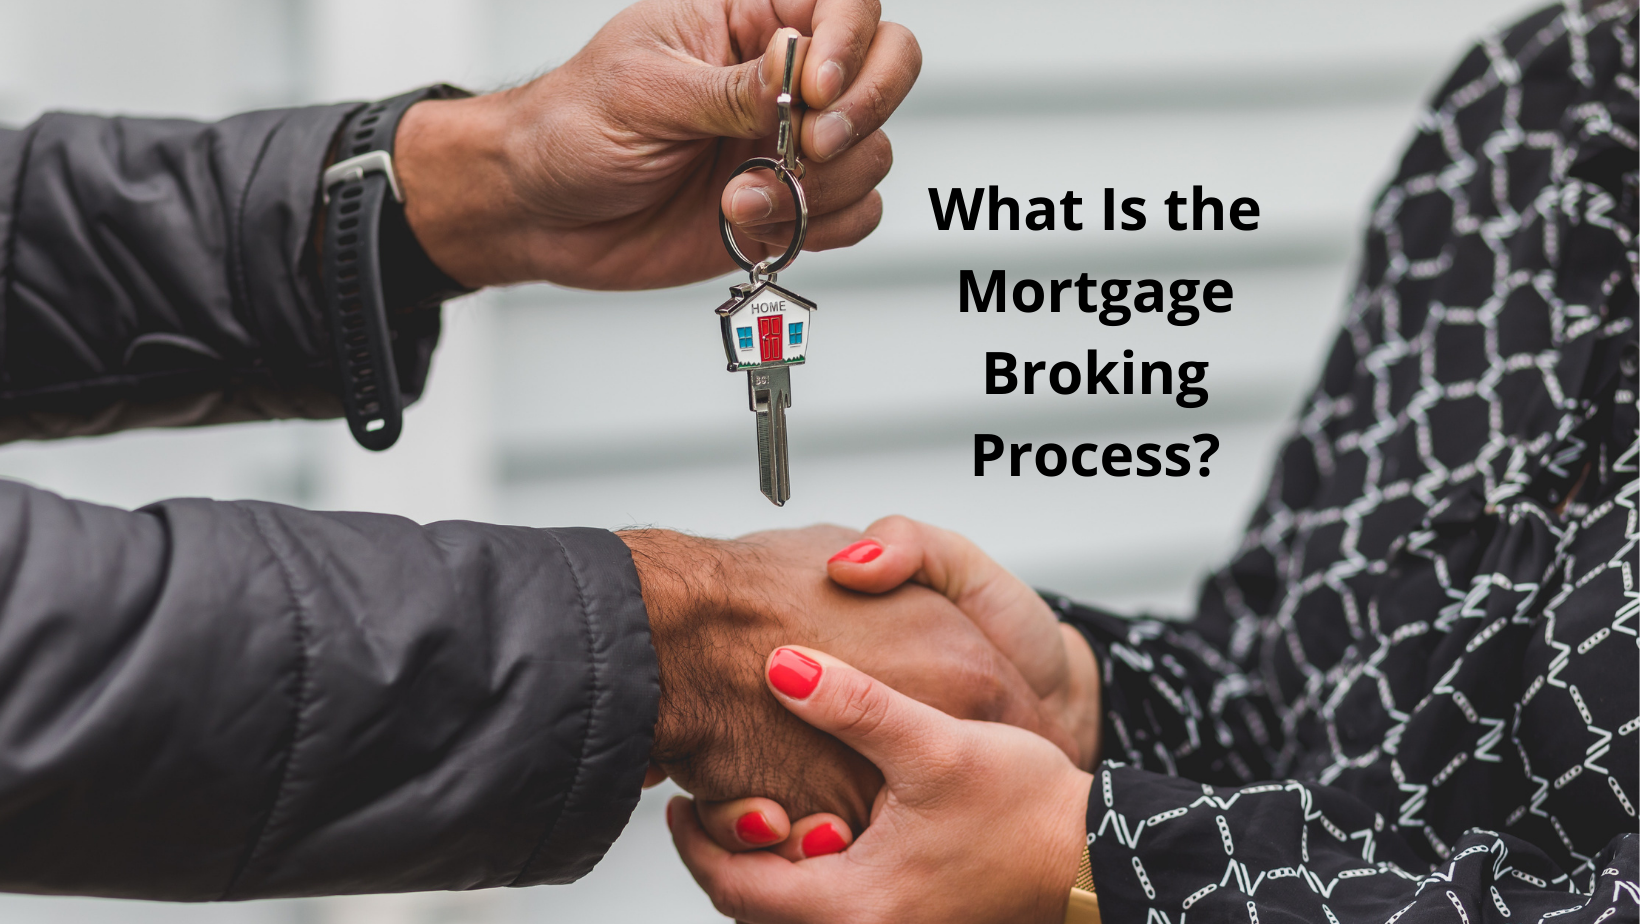 What Is the Mortgage Broking Process?